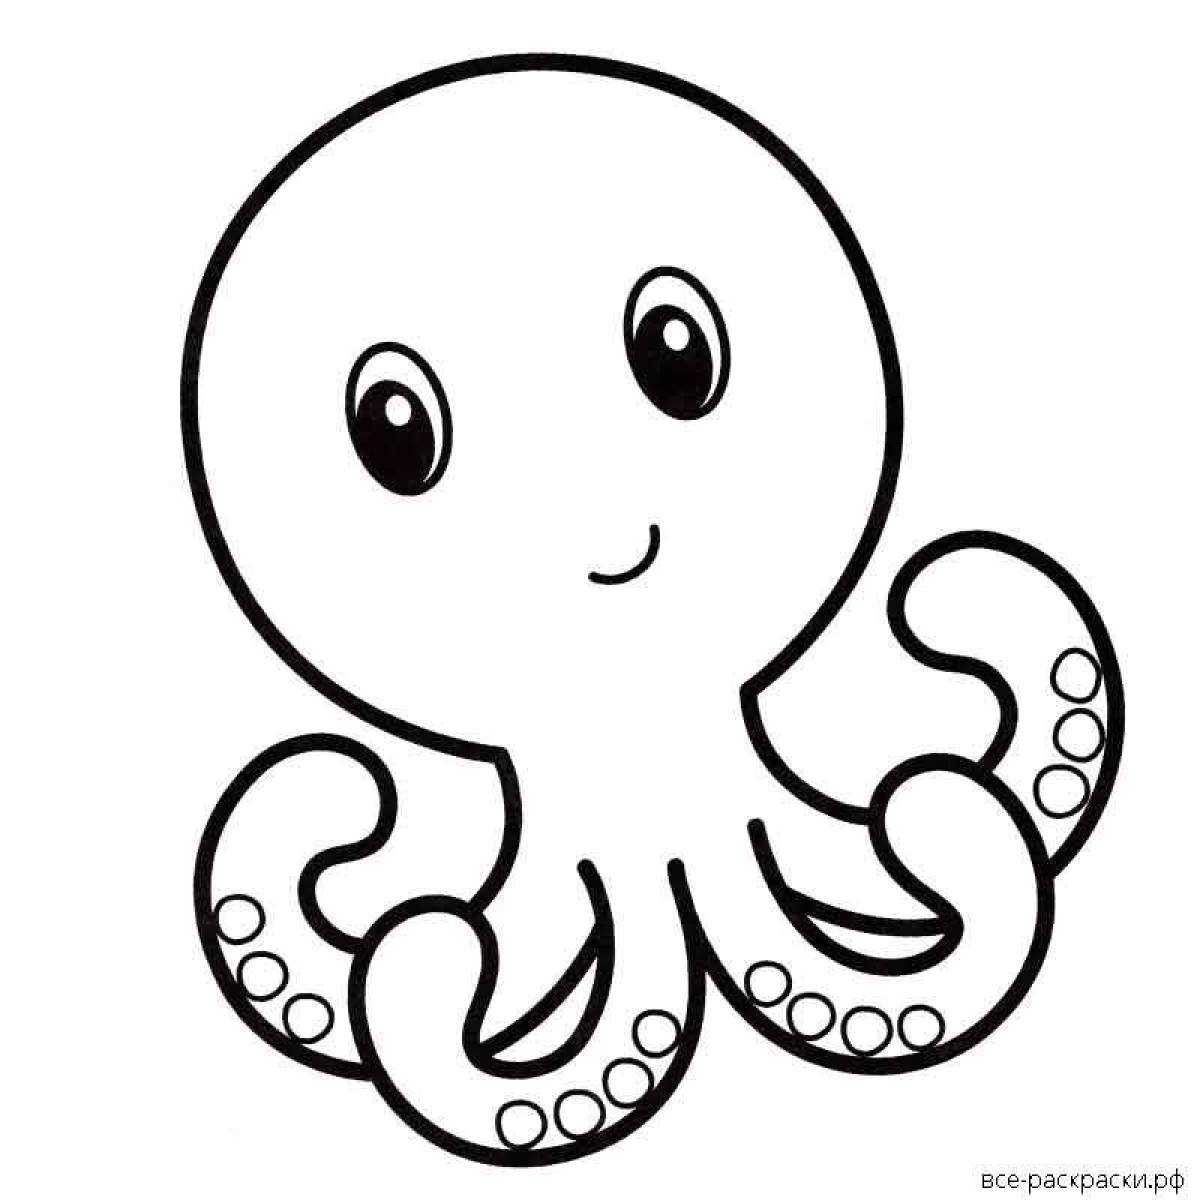 Outstanding octopus coloring page for kids